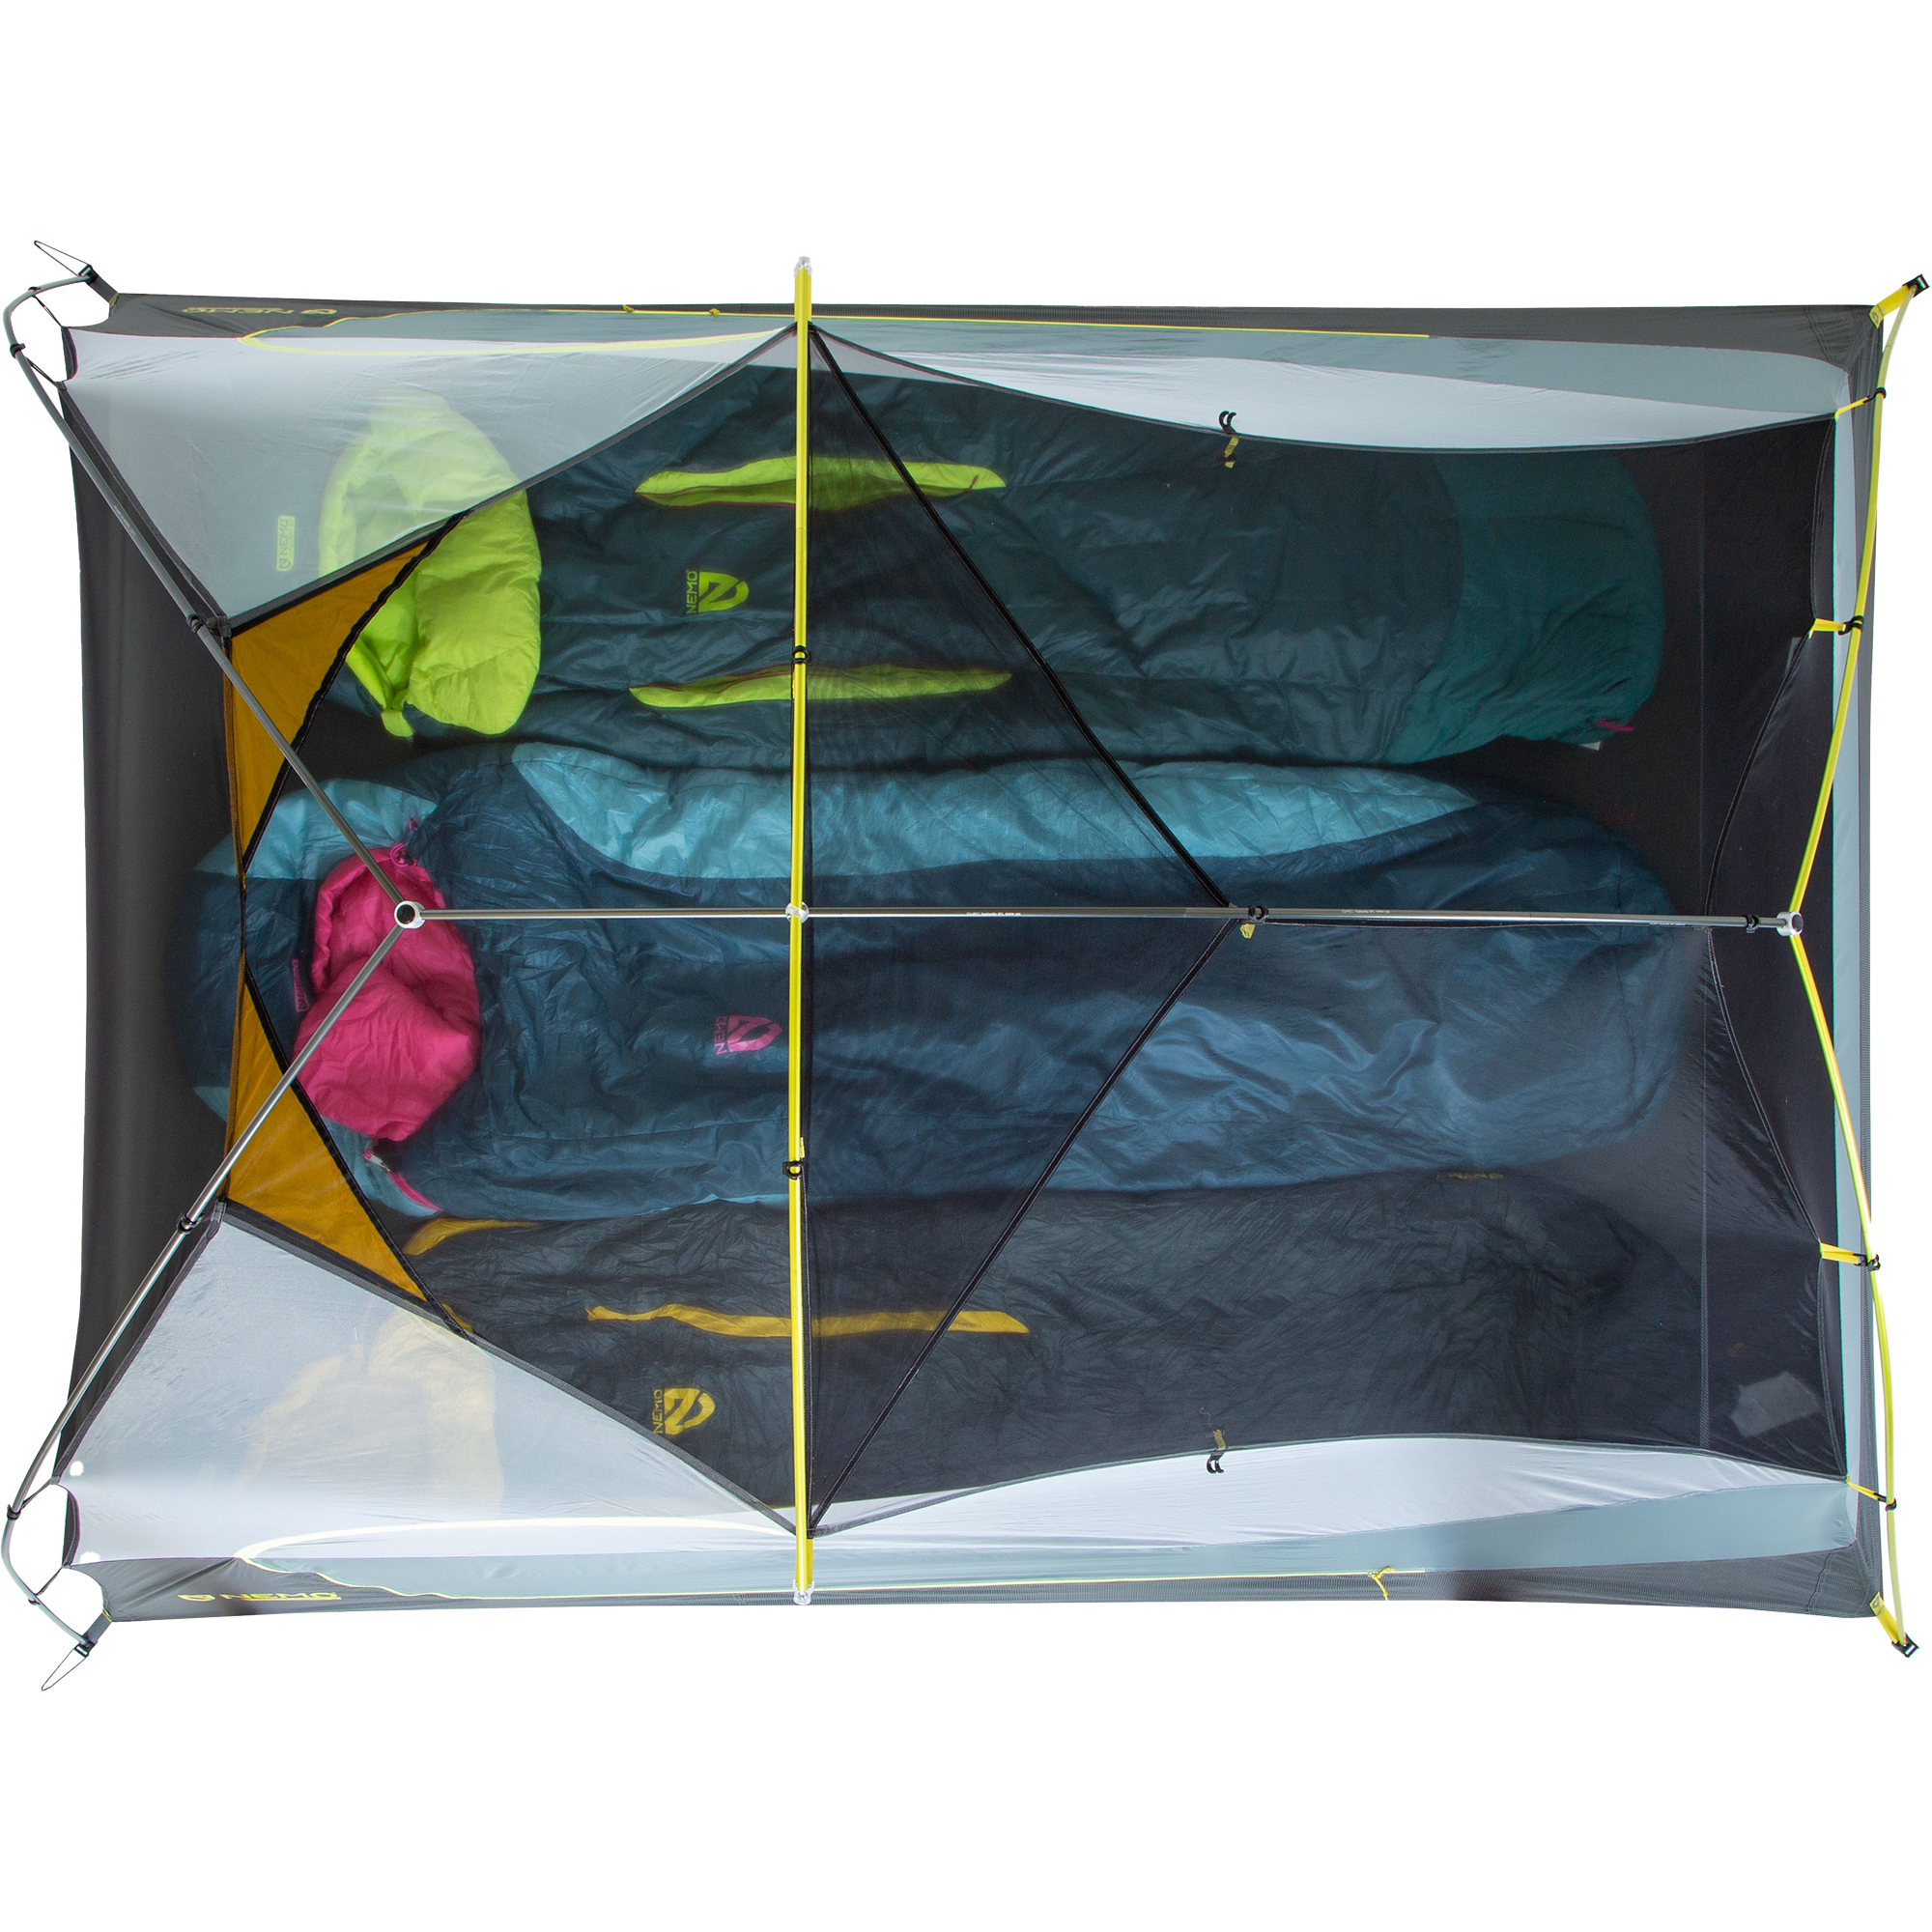 Nemo Dragonfly OSMO 3 Ultralight Backpacking Tent